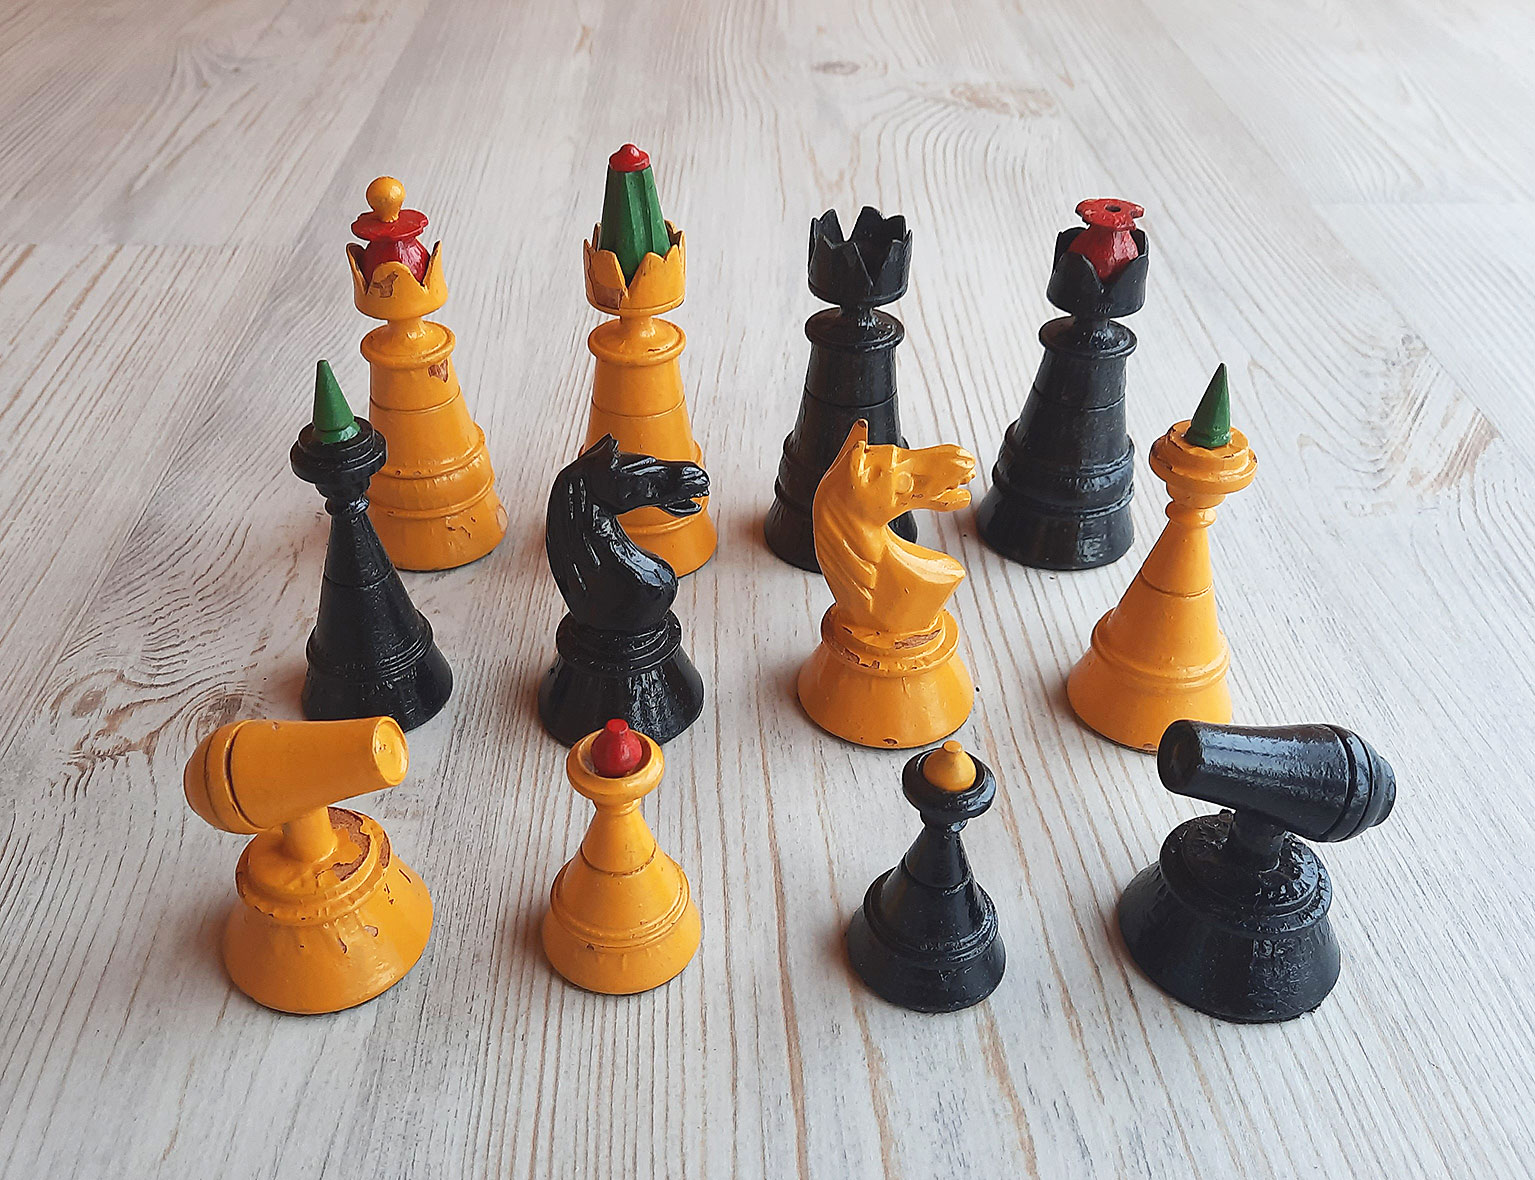 Cannon chess pieces - Chess Forums 